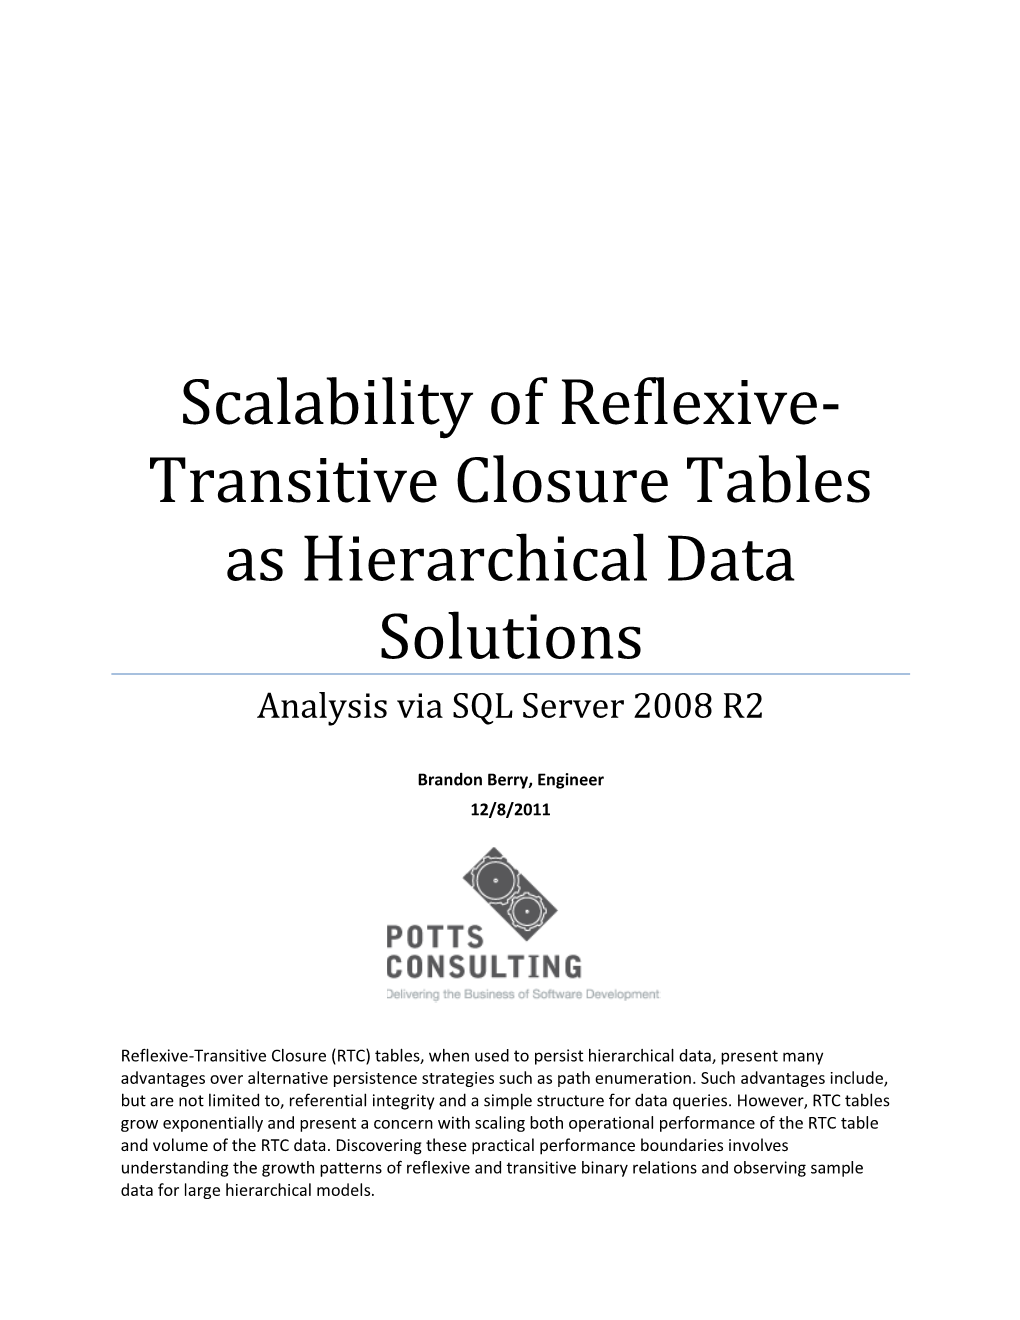 Scalability of Reflexive-Transitive Closure Tables As Hierarchical Data Solutions